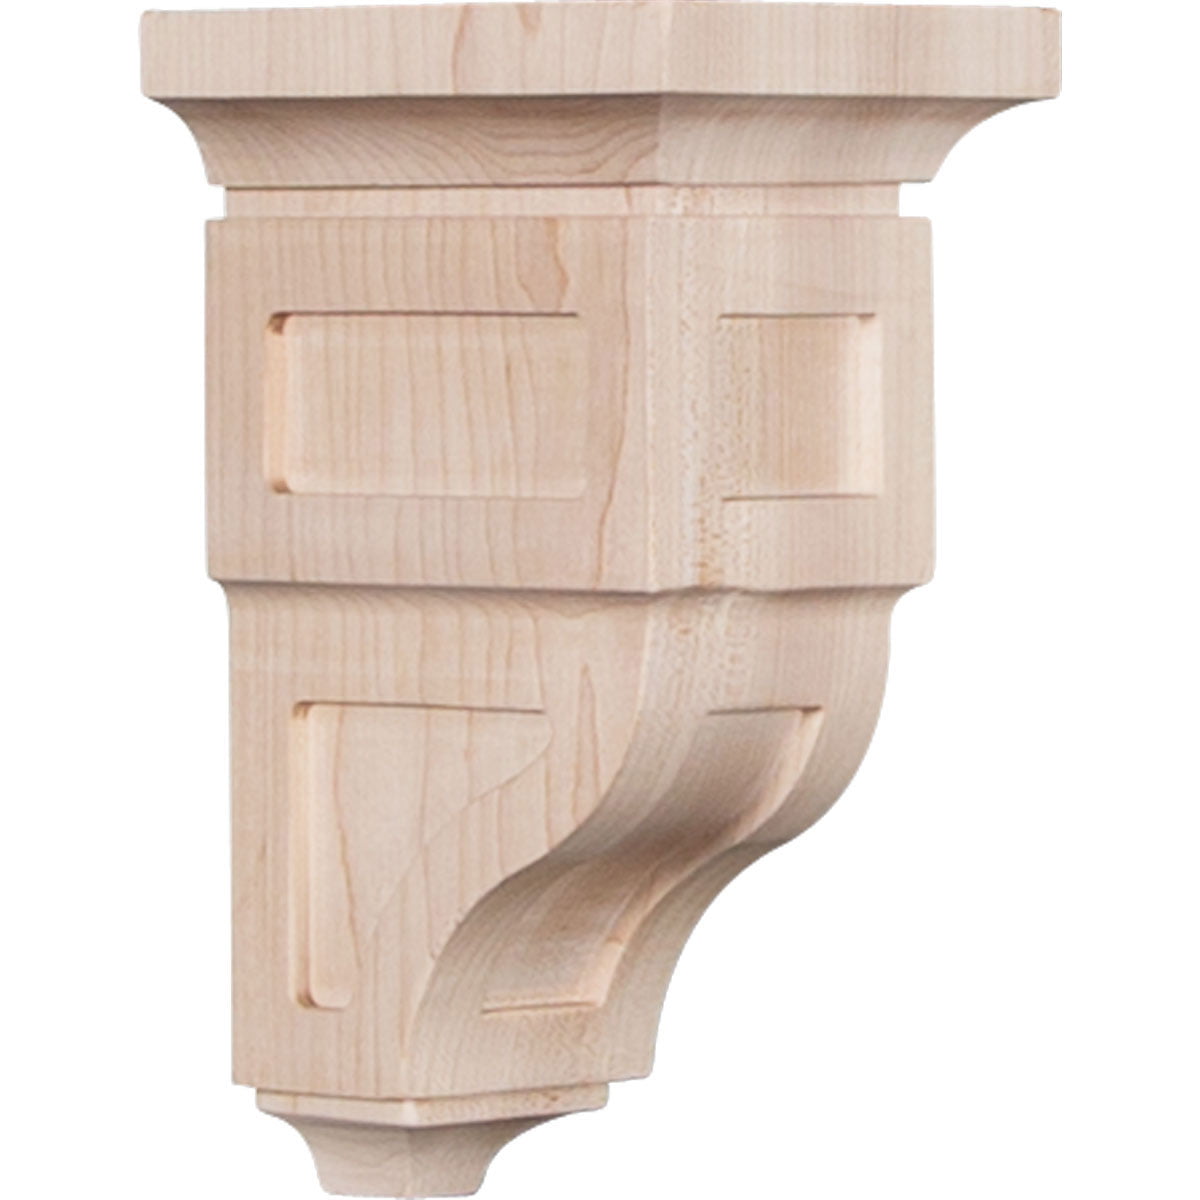 Details about   Decorative Solid Wood Corbel  14 ½” x 6” x 7 7/8” 